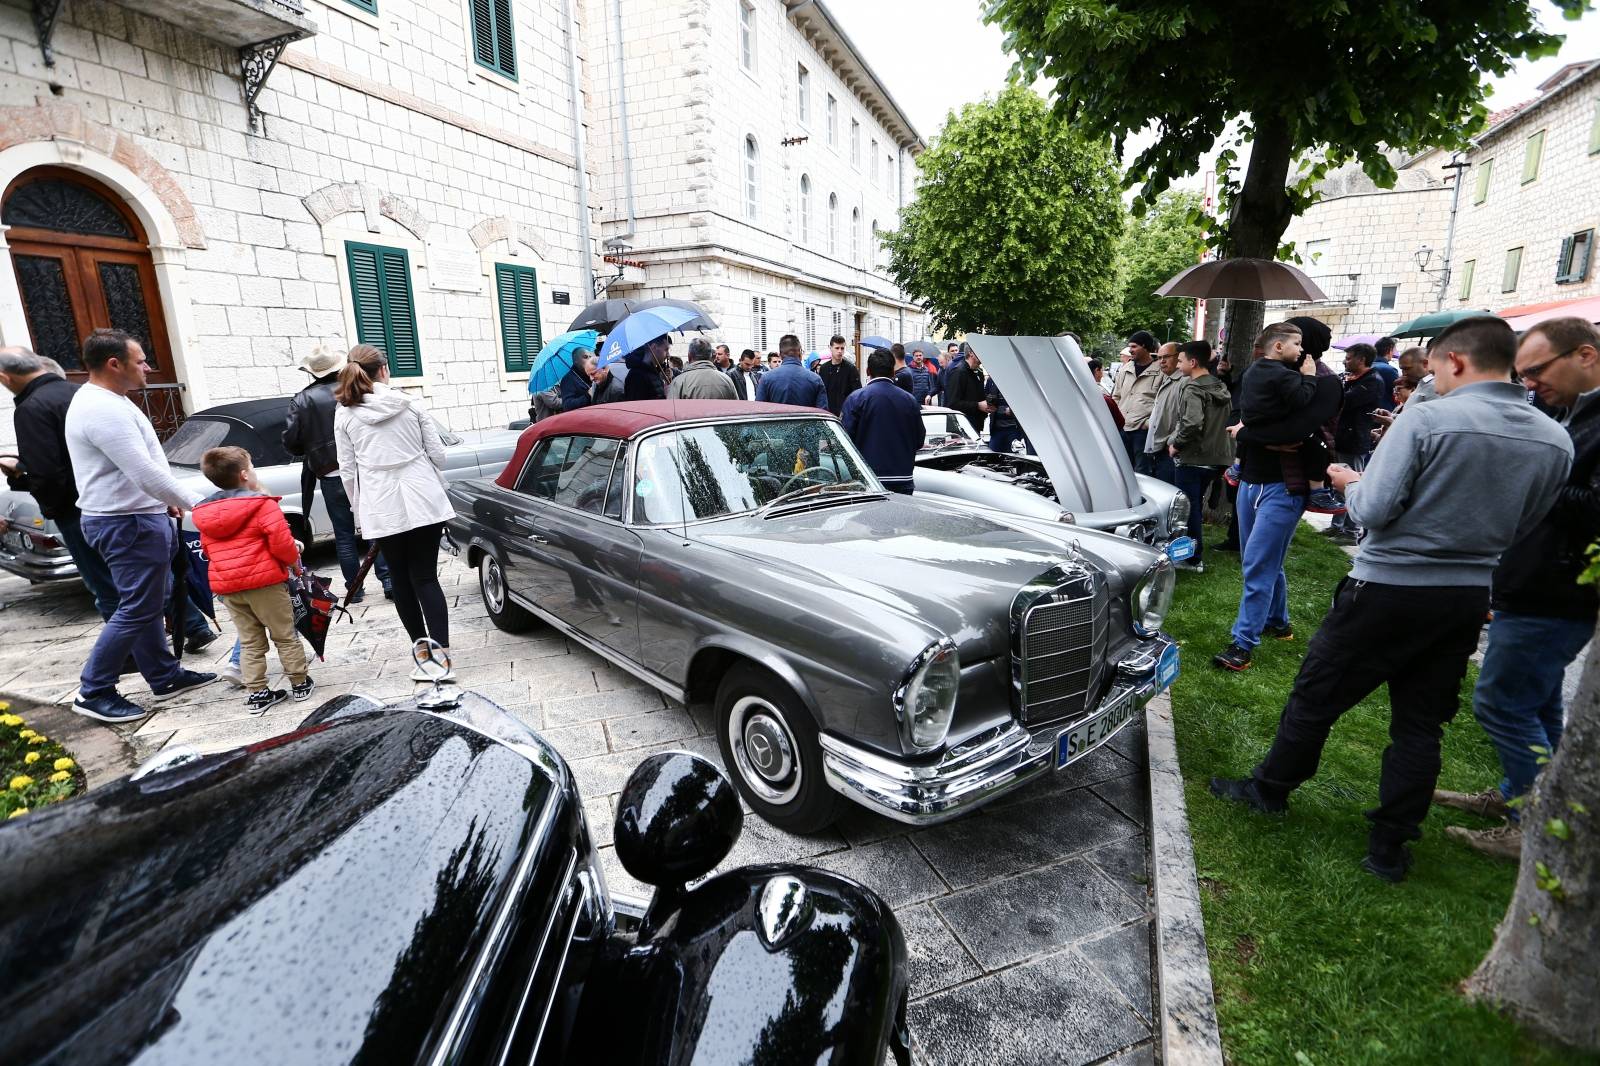 People look at oldtimer Mercedes cars in Imotski